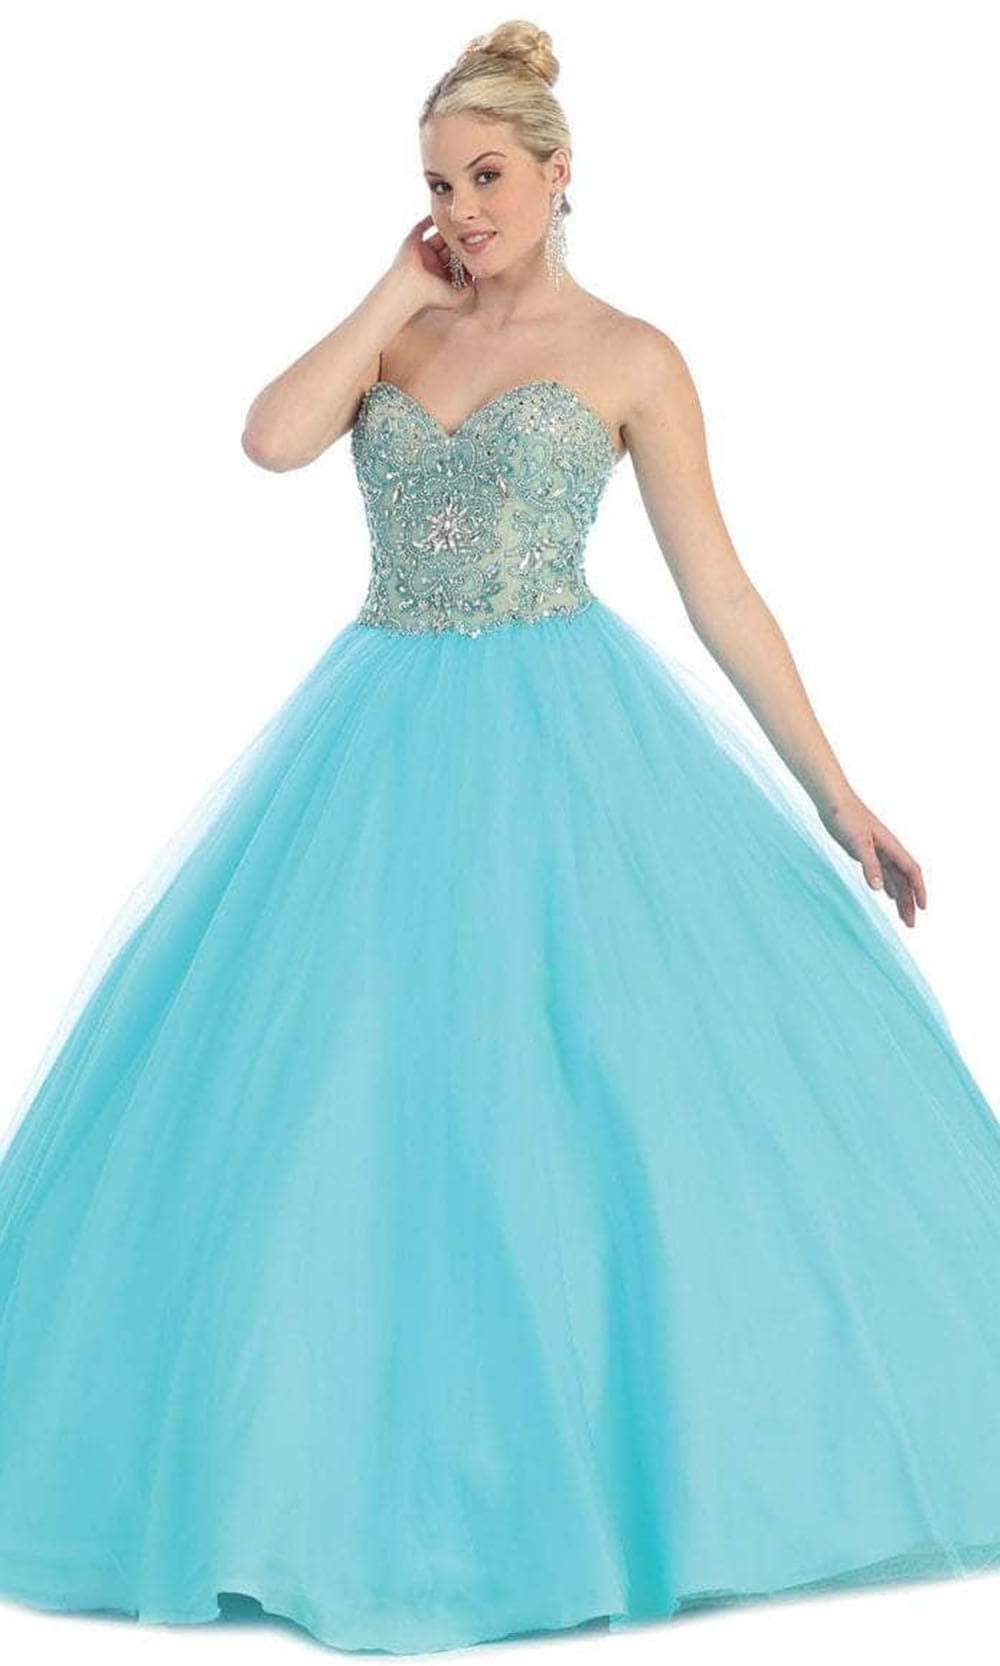 May Queen LK38 - Beaded Strapless Prom Ballgown Ball Gowns